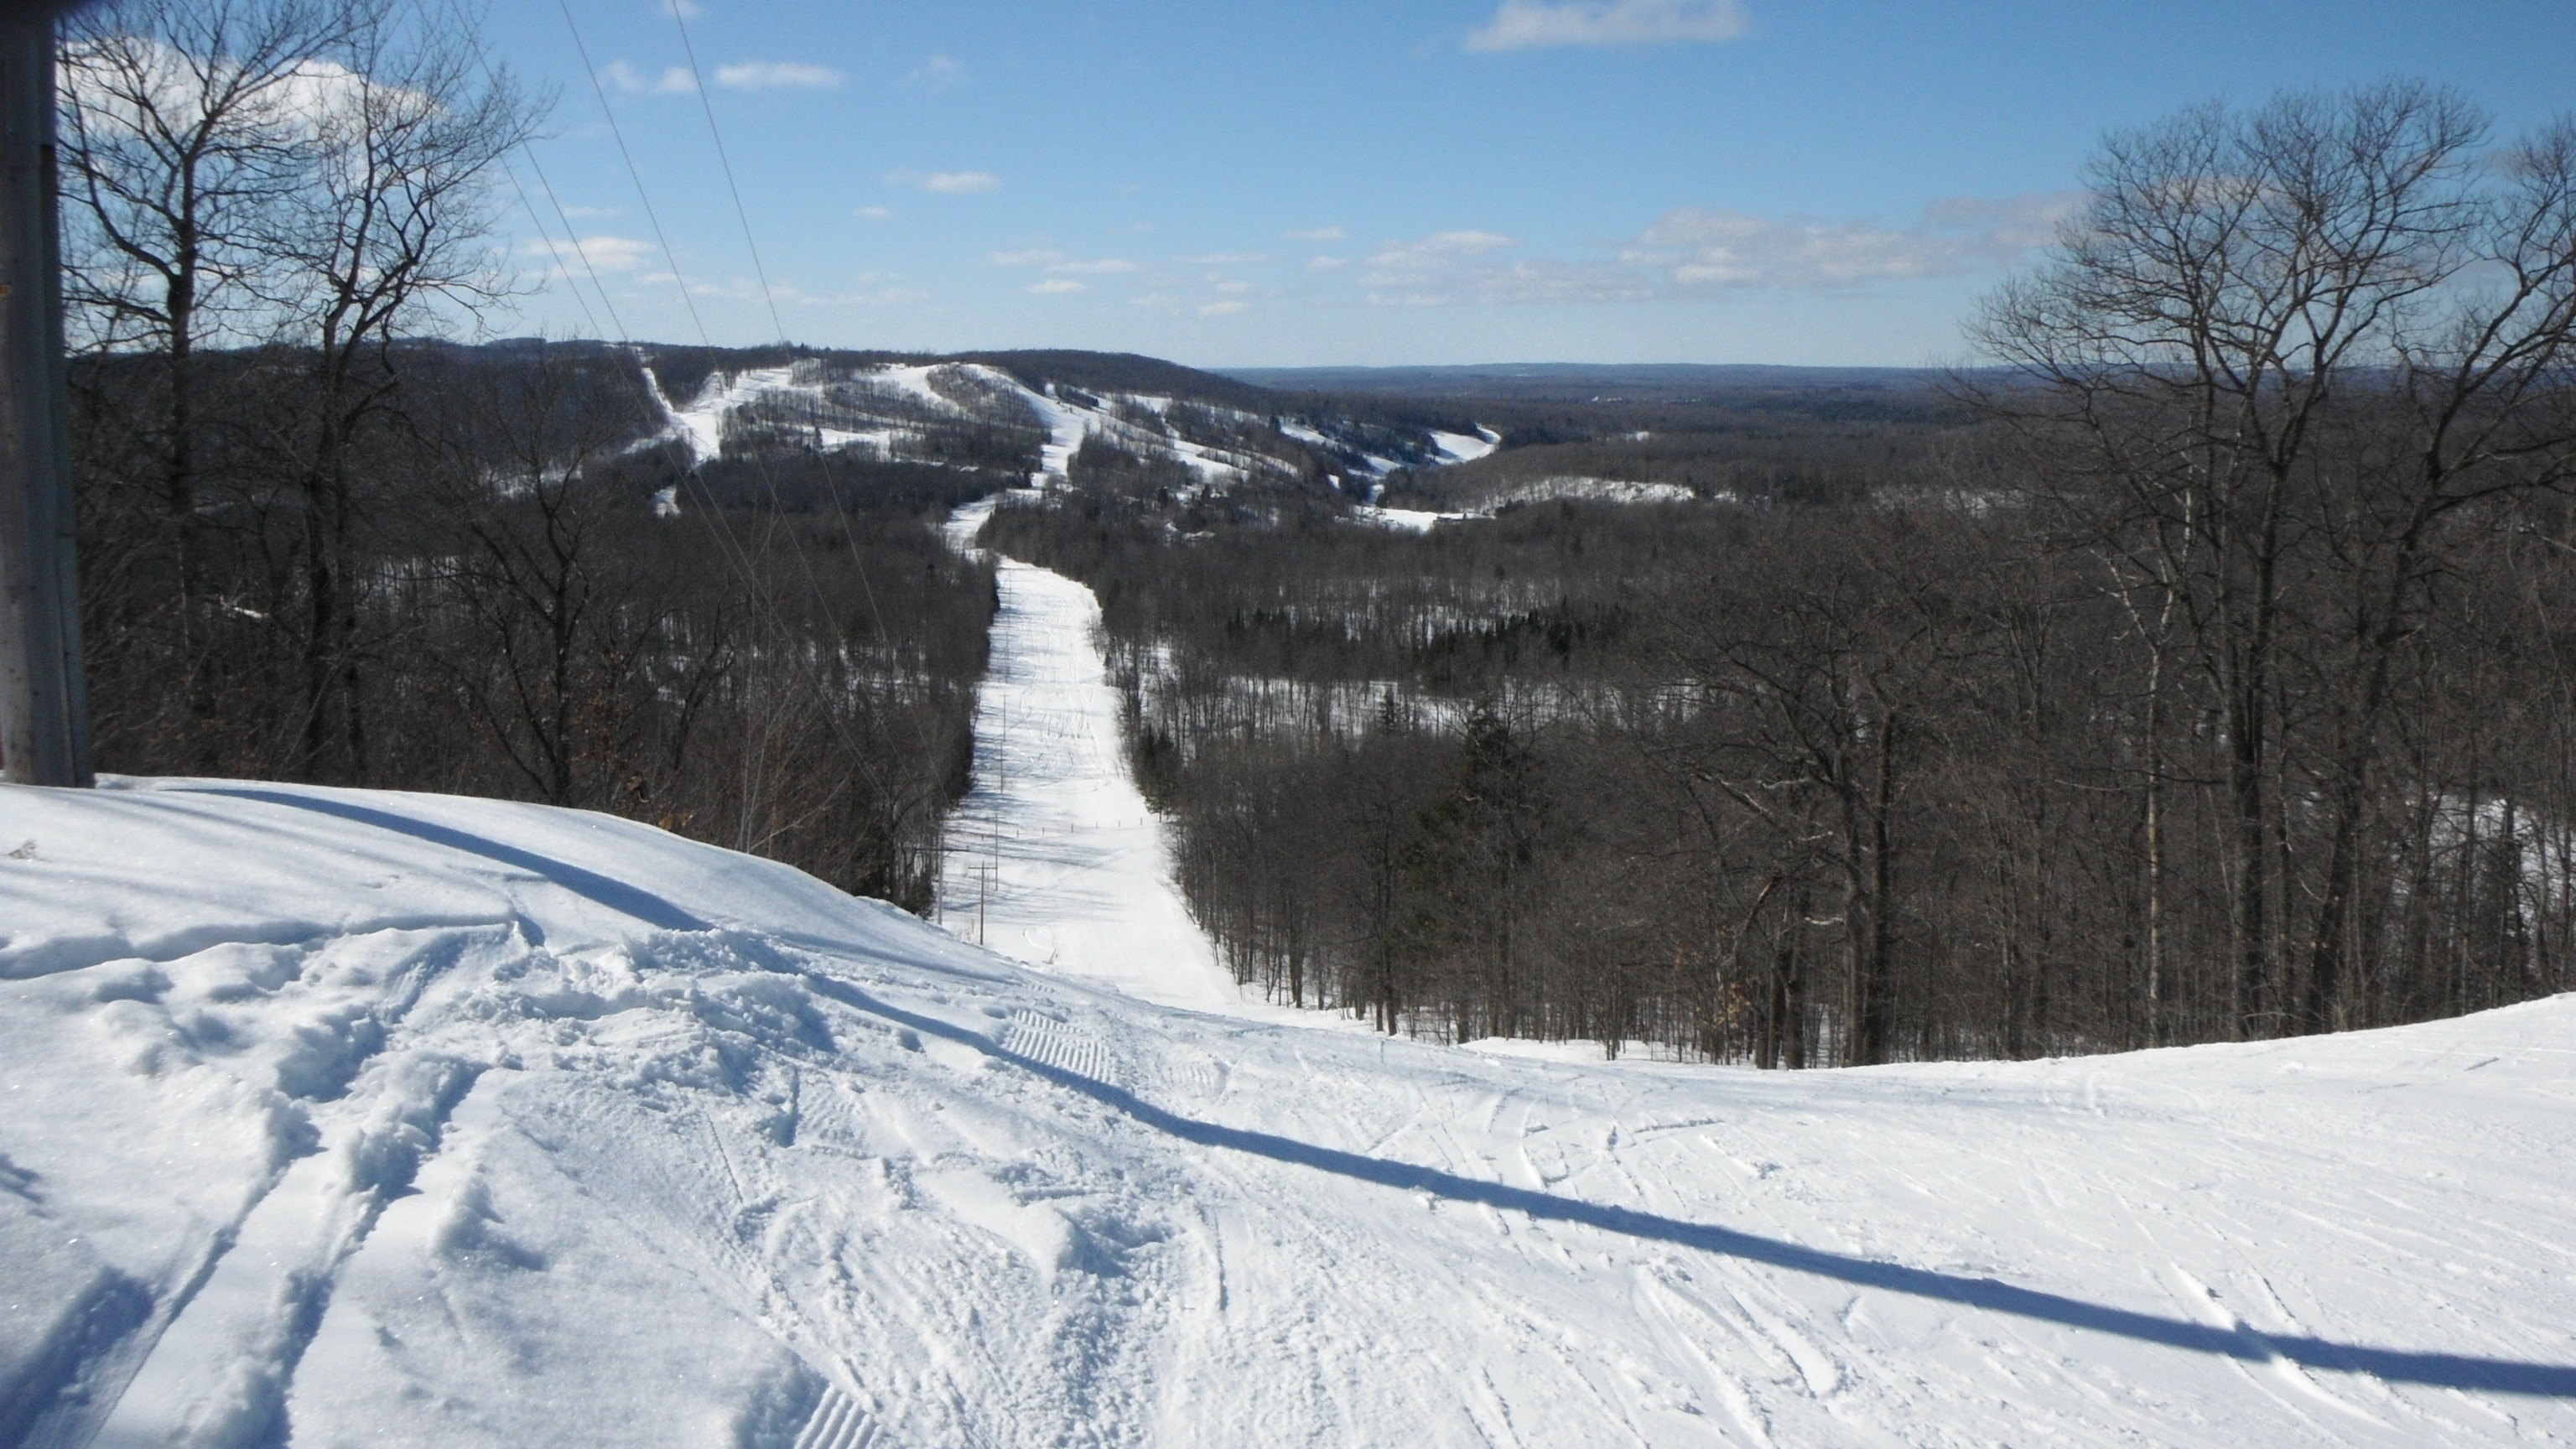 Skiing at Indianhead Mountain, MI looking towards Blackjack.  Lots of snow...and you can ski both places.